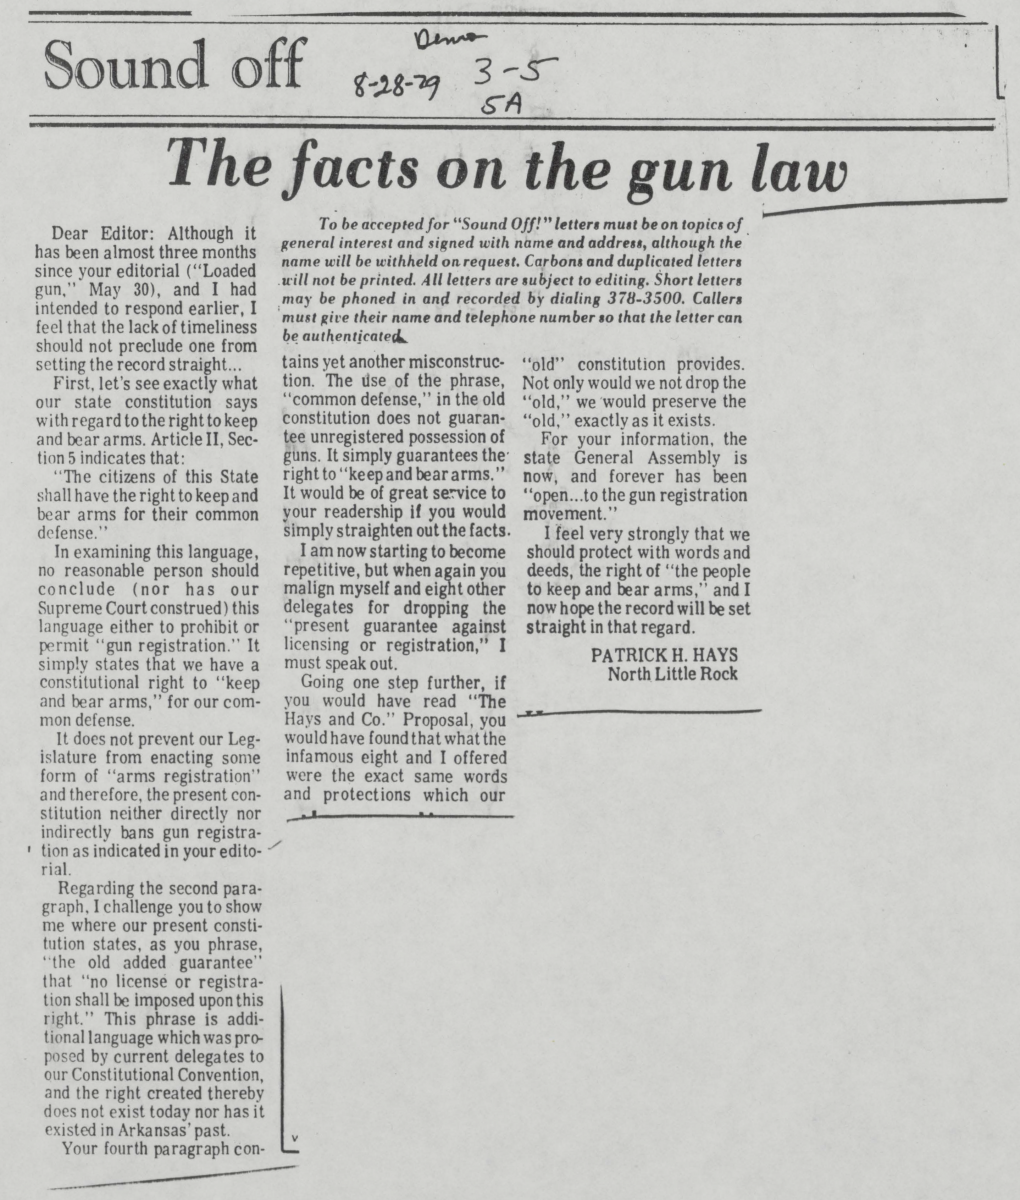 Arkansas Democrat Sound Off article titled "Sound Off: The facts on the gun law." Dated August 28, 1979.